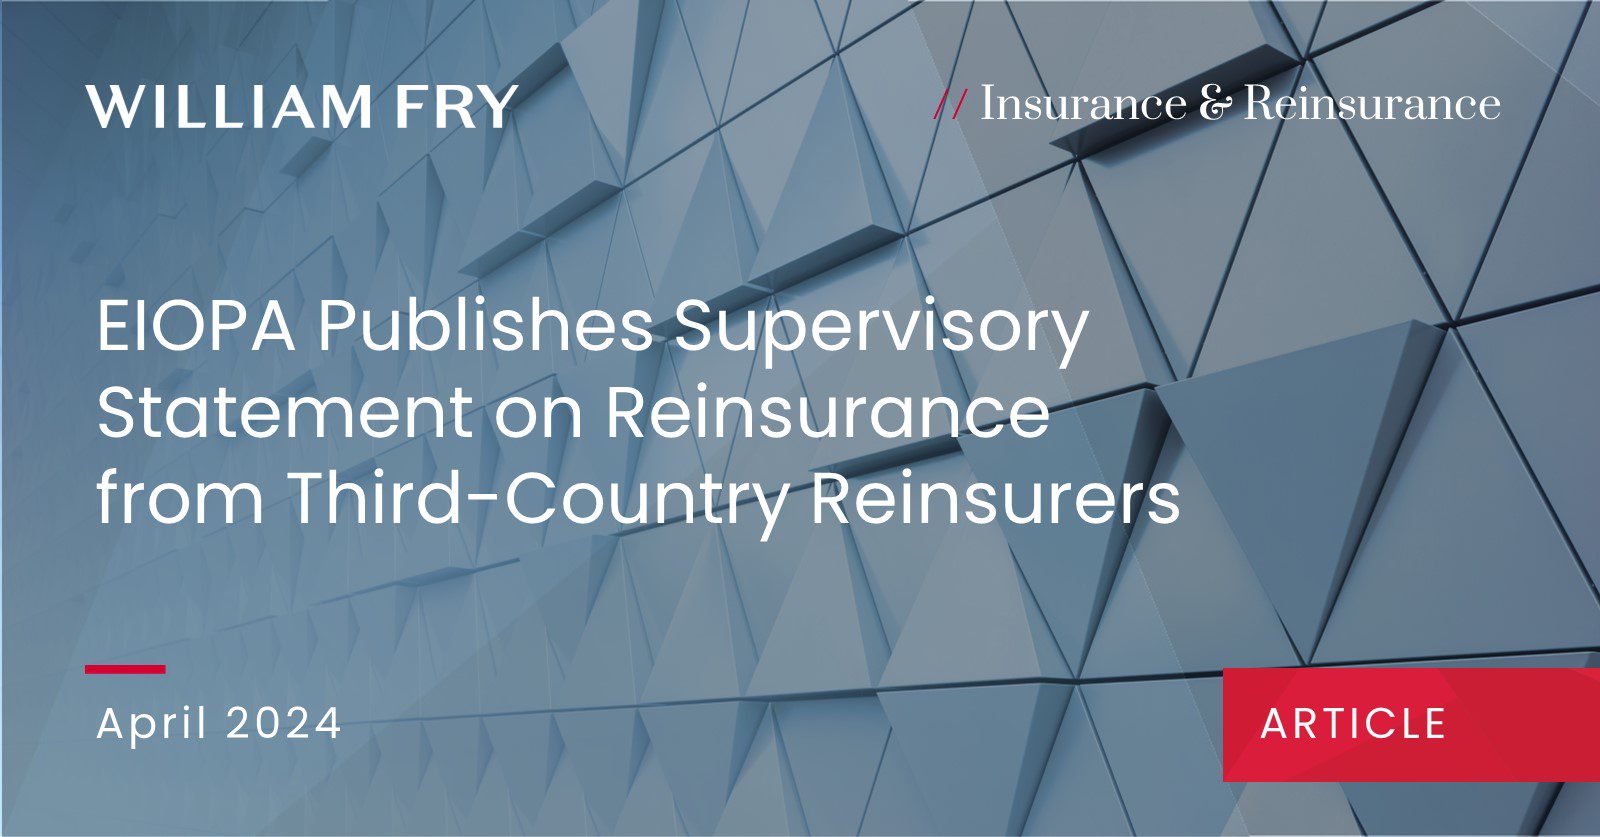 EIOPA Publishes Supervisory Statement on Reinsurance from Third-Country Reinsurers